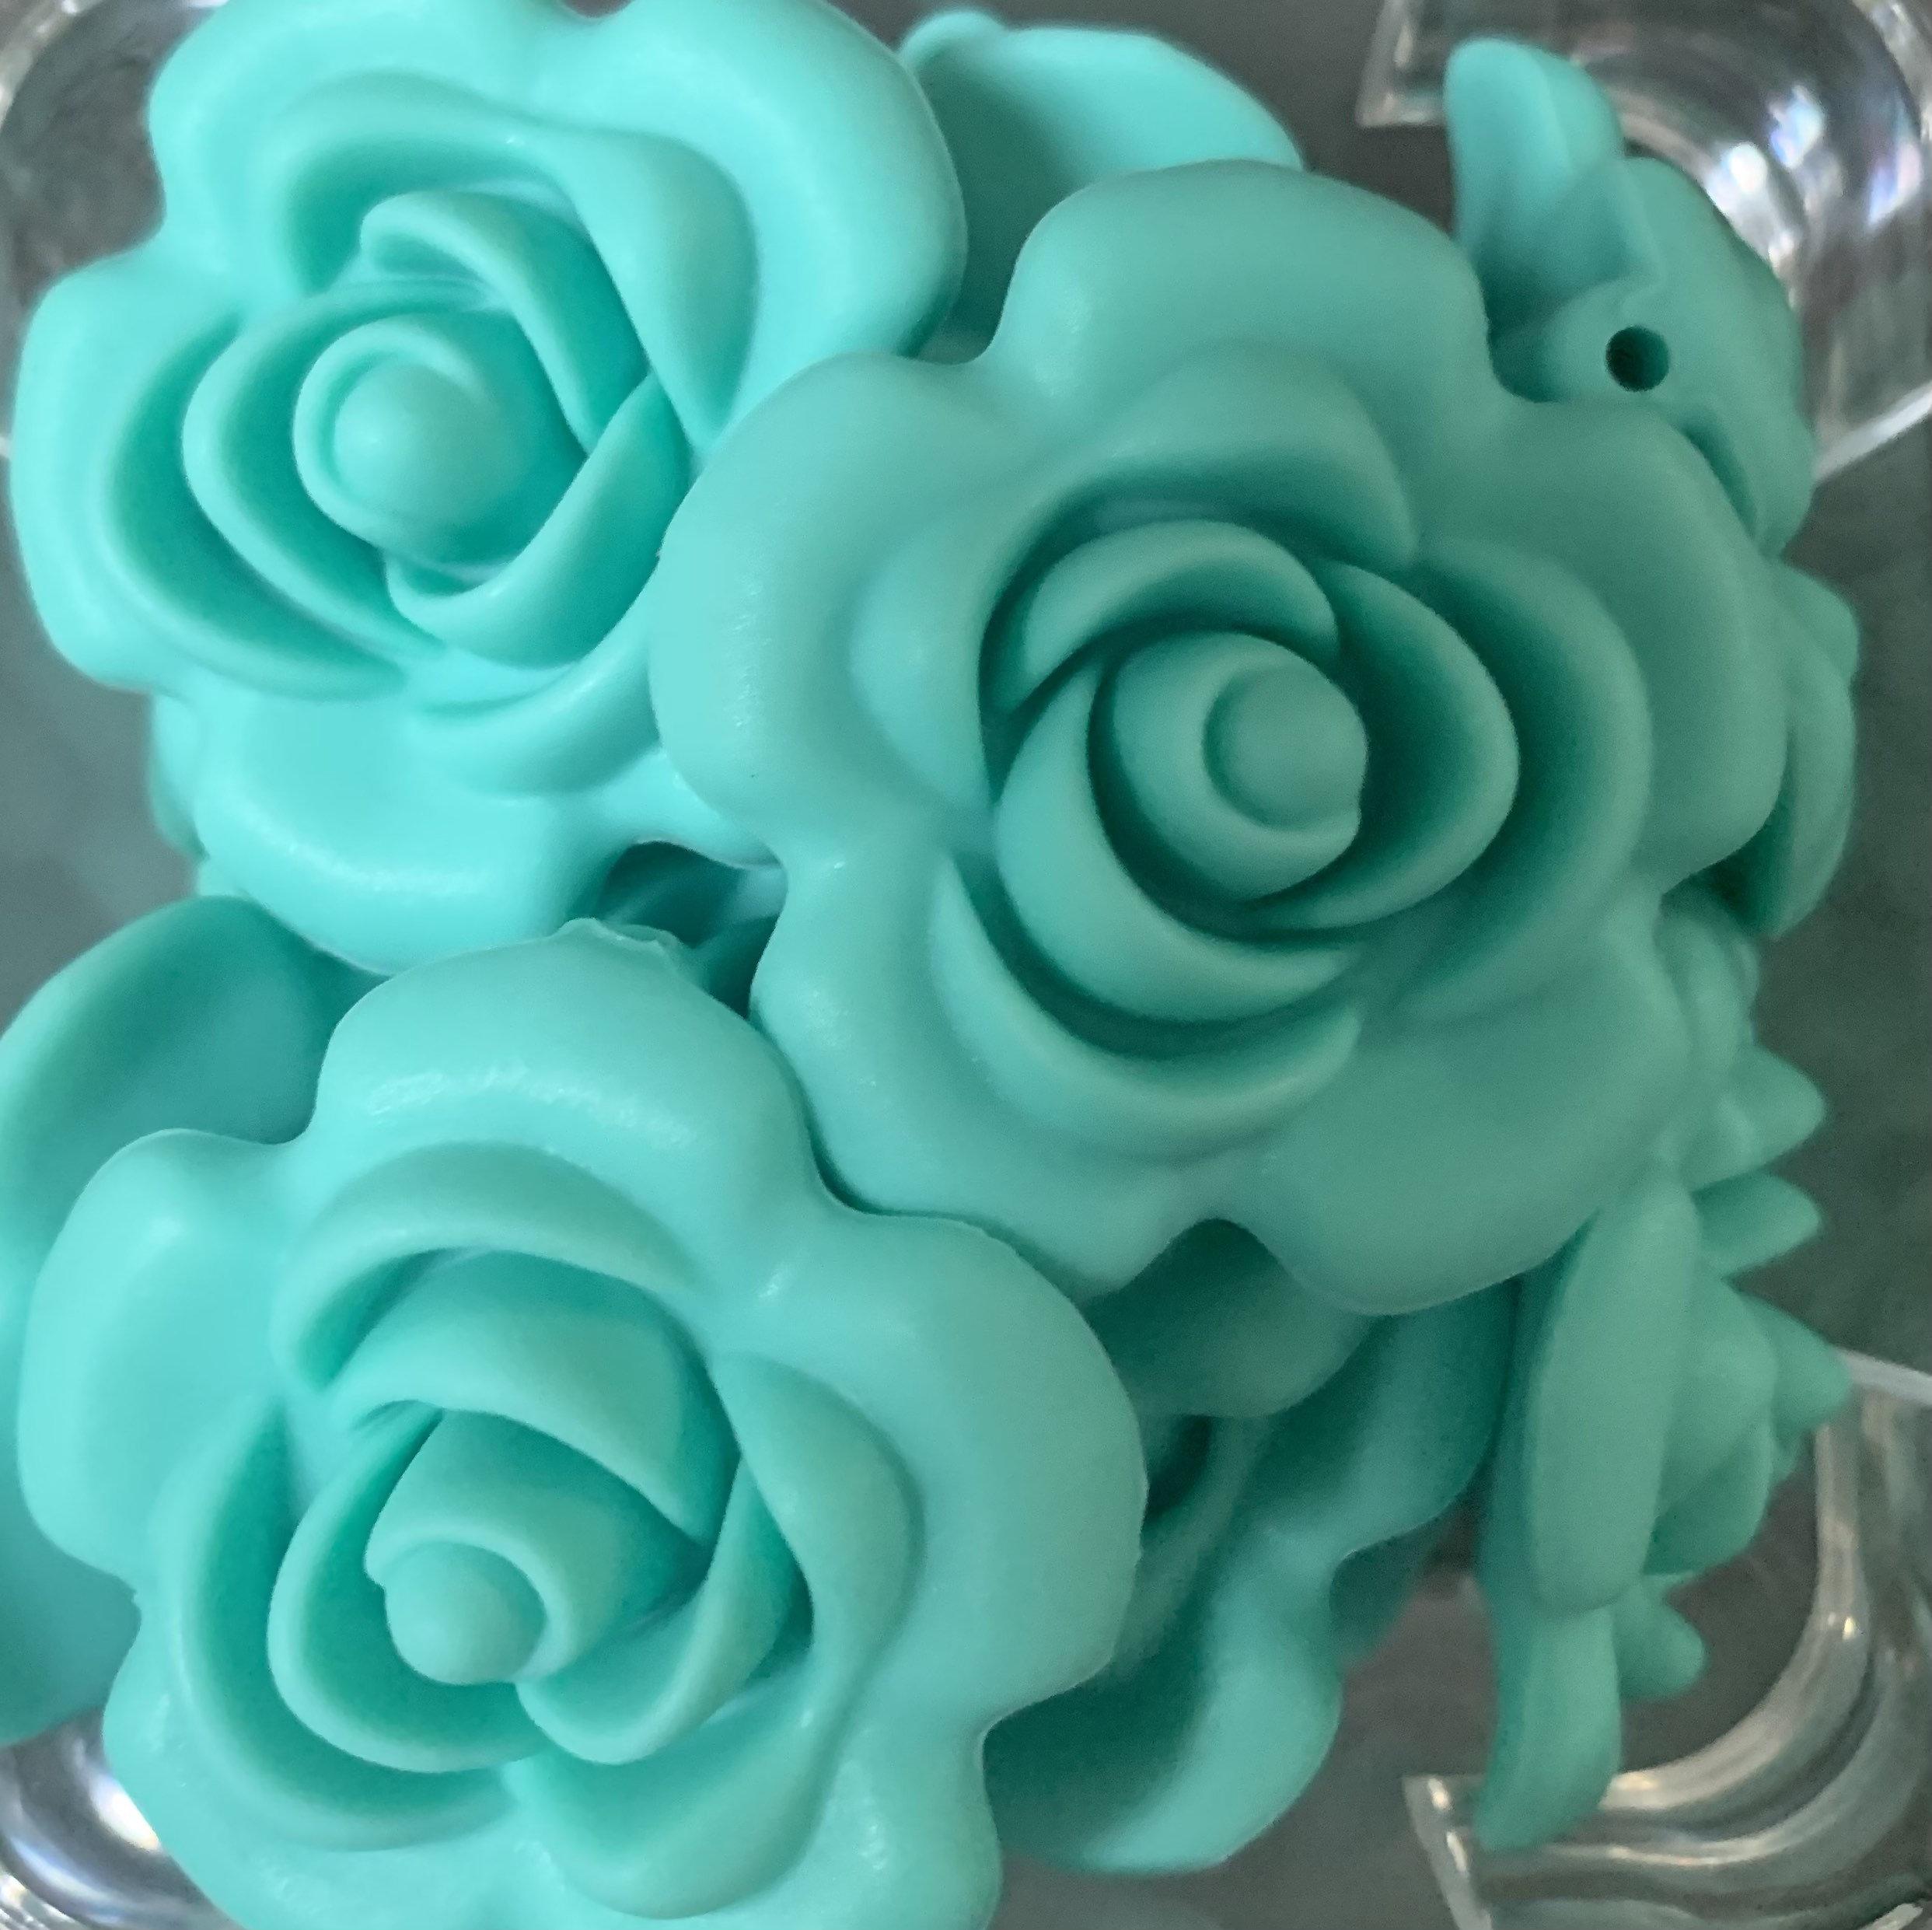 Silicone Teal Flower Beads set of 5